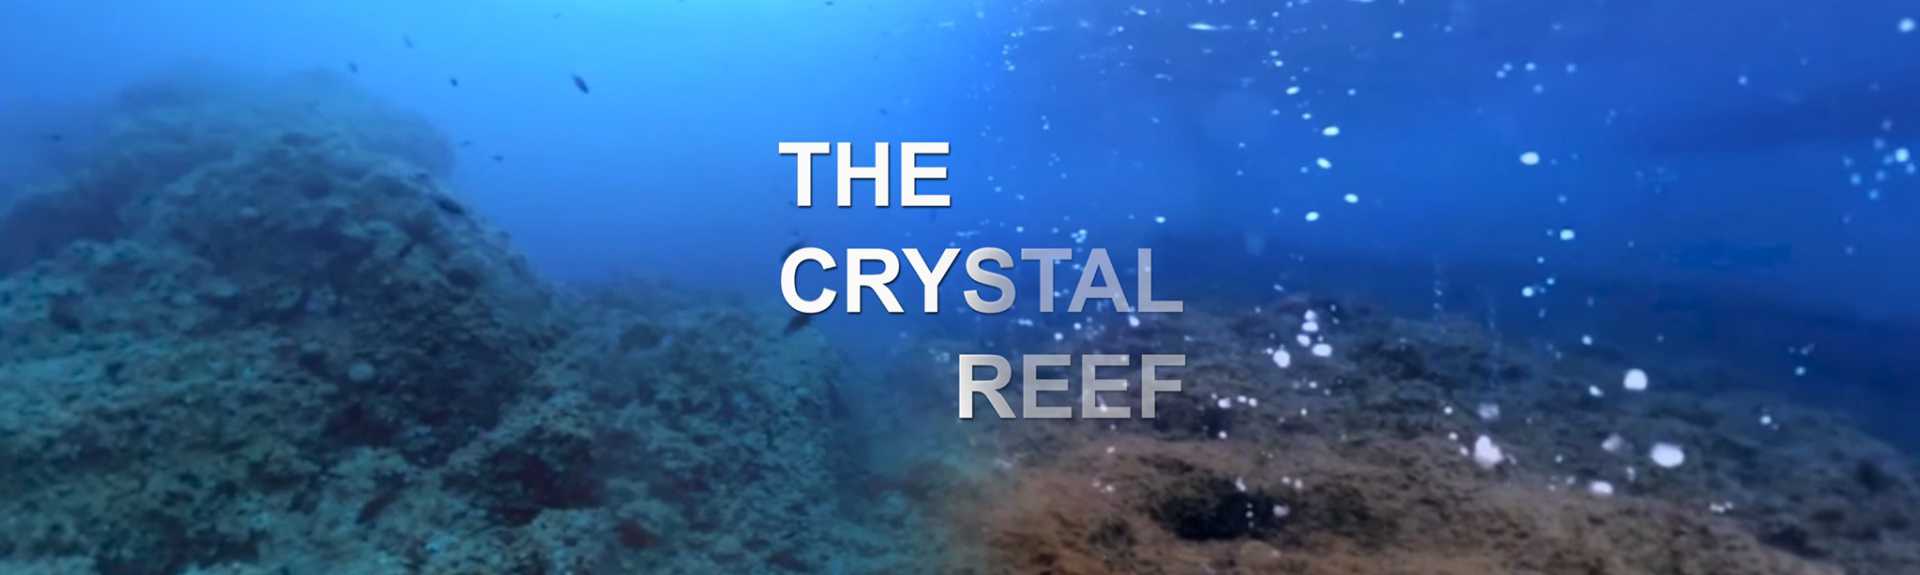 The Crystal Reef